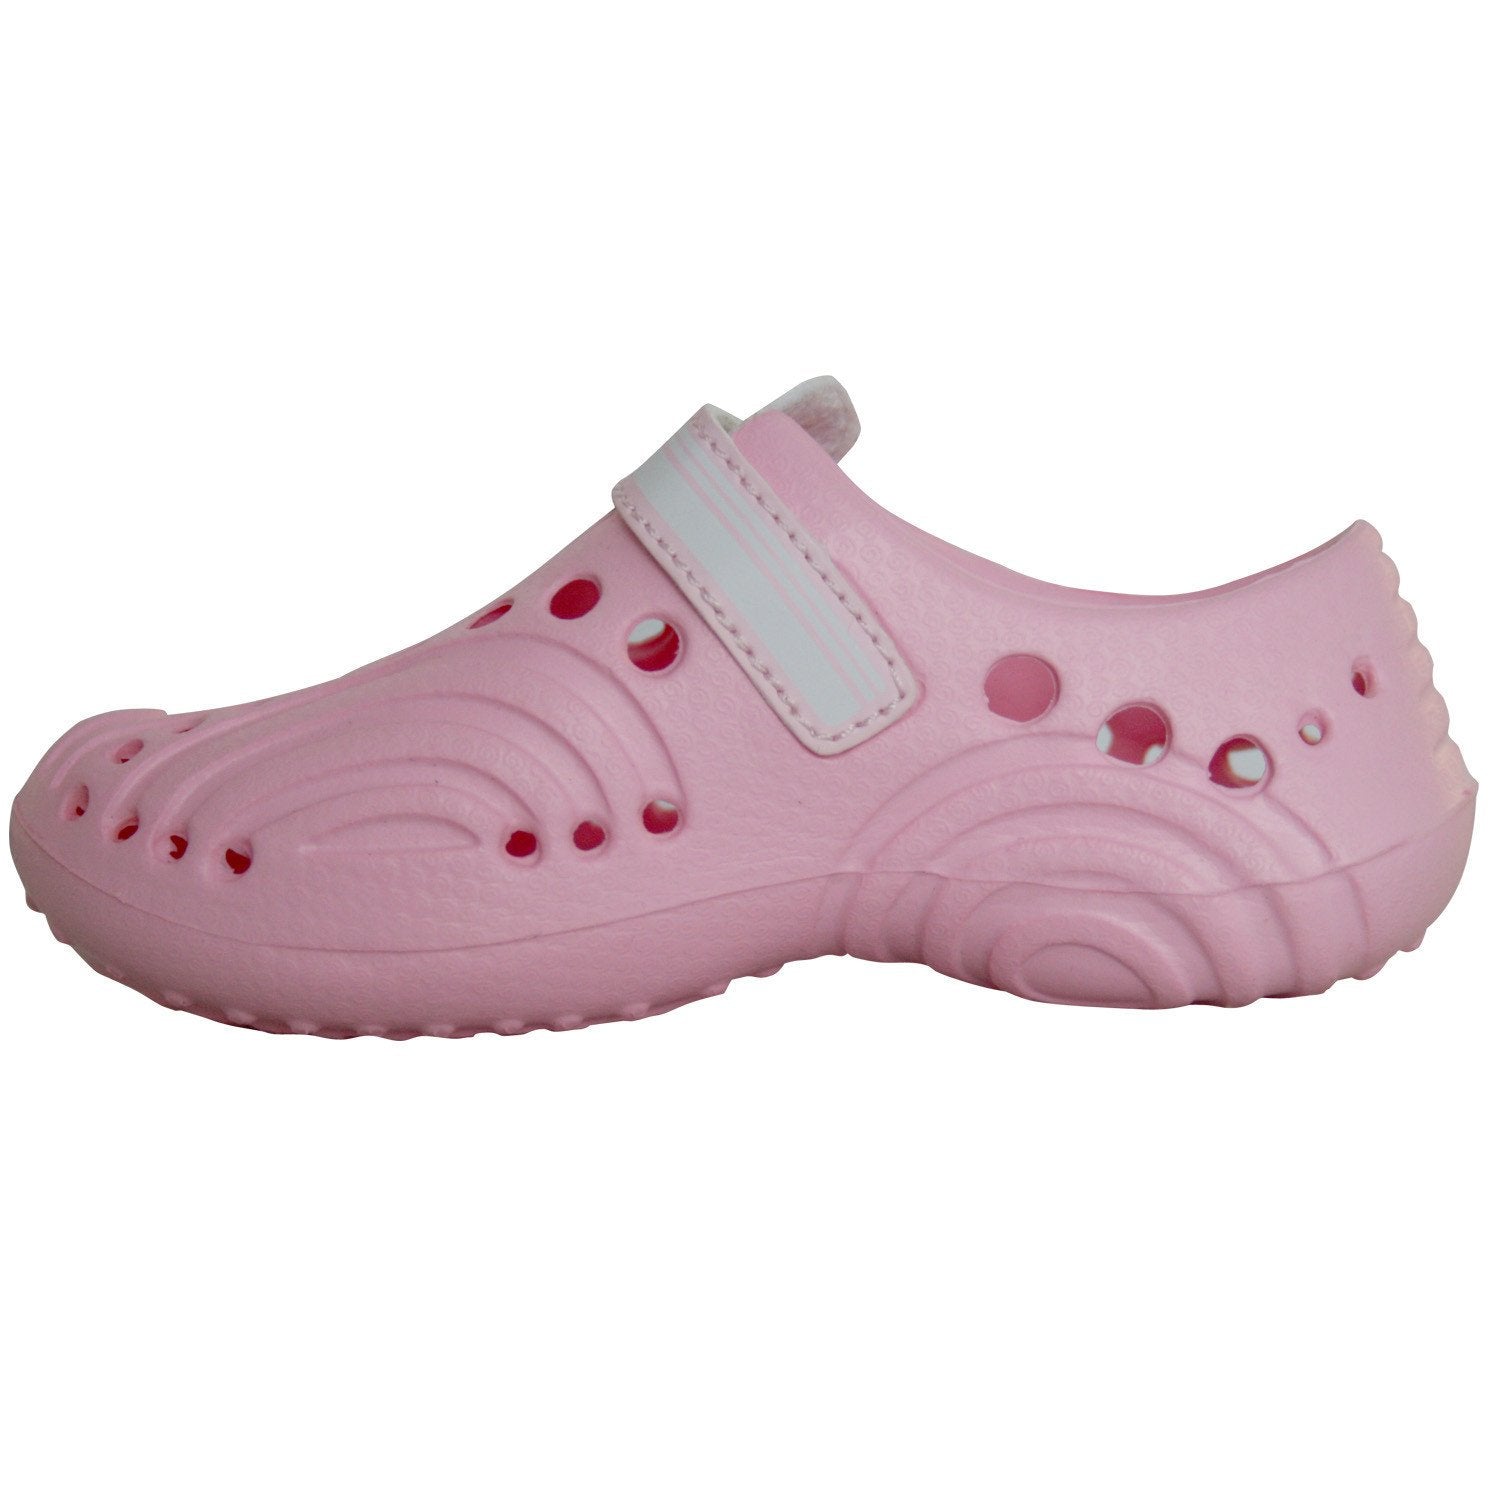 Hounds Toddlers' Ultralite Shoes